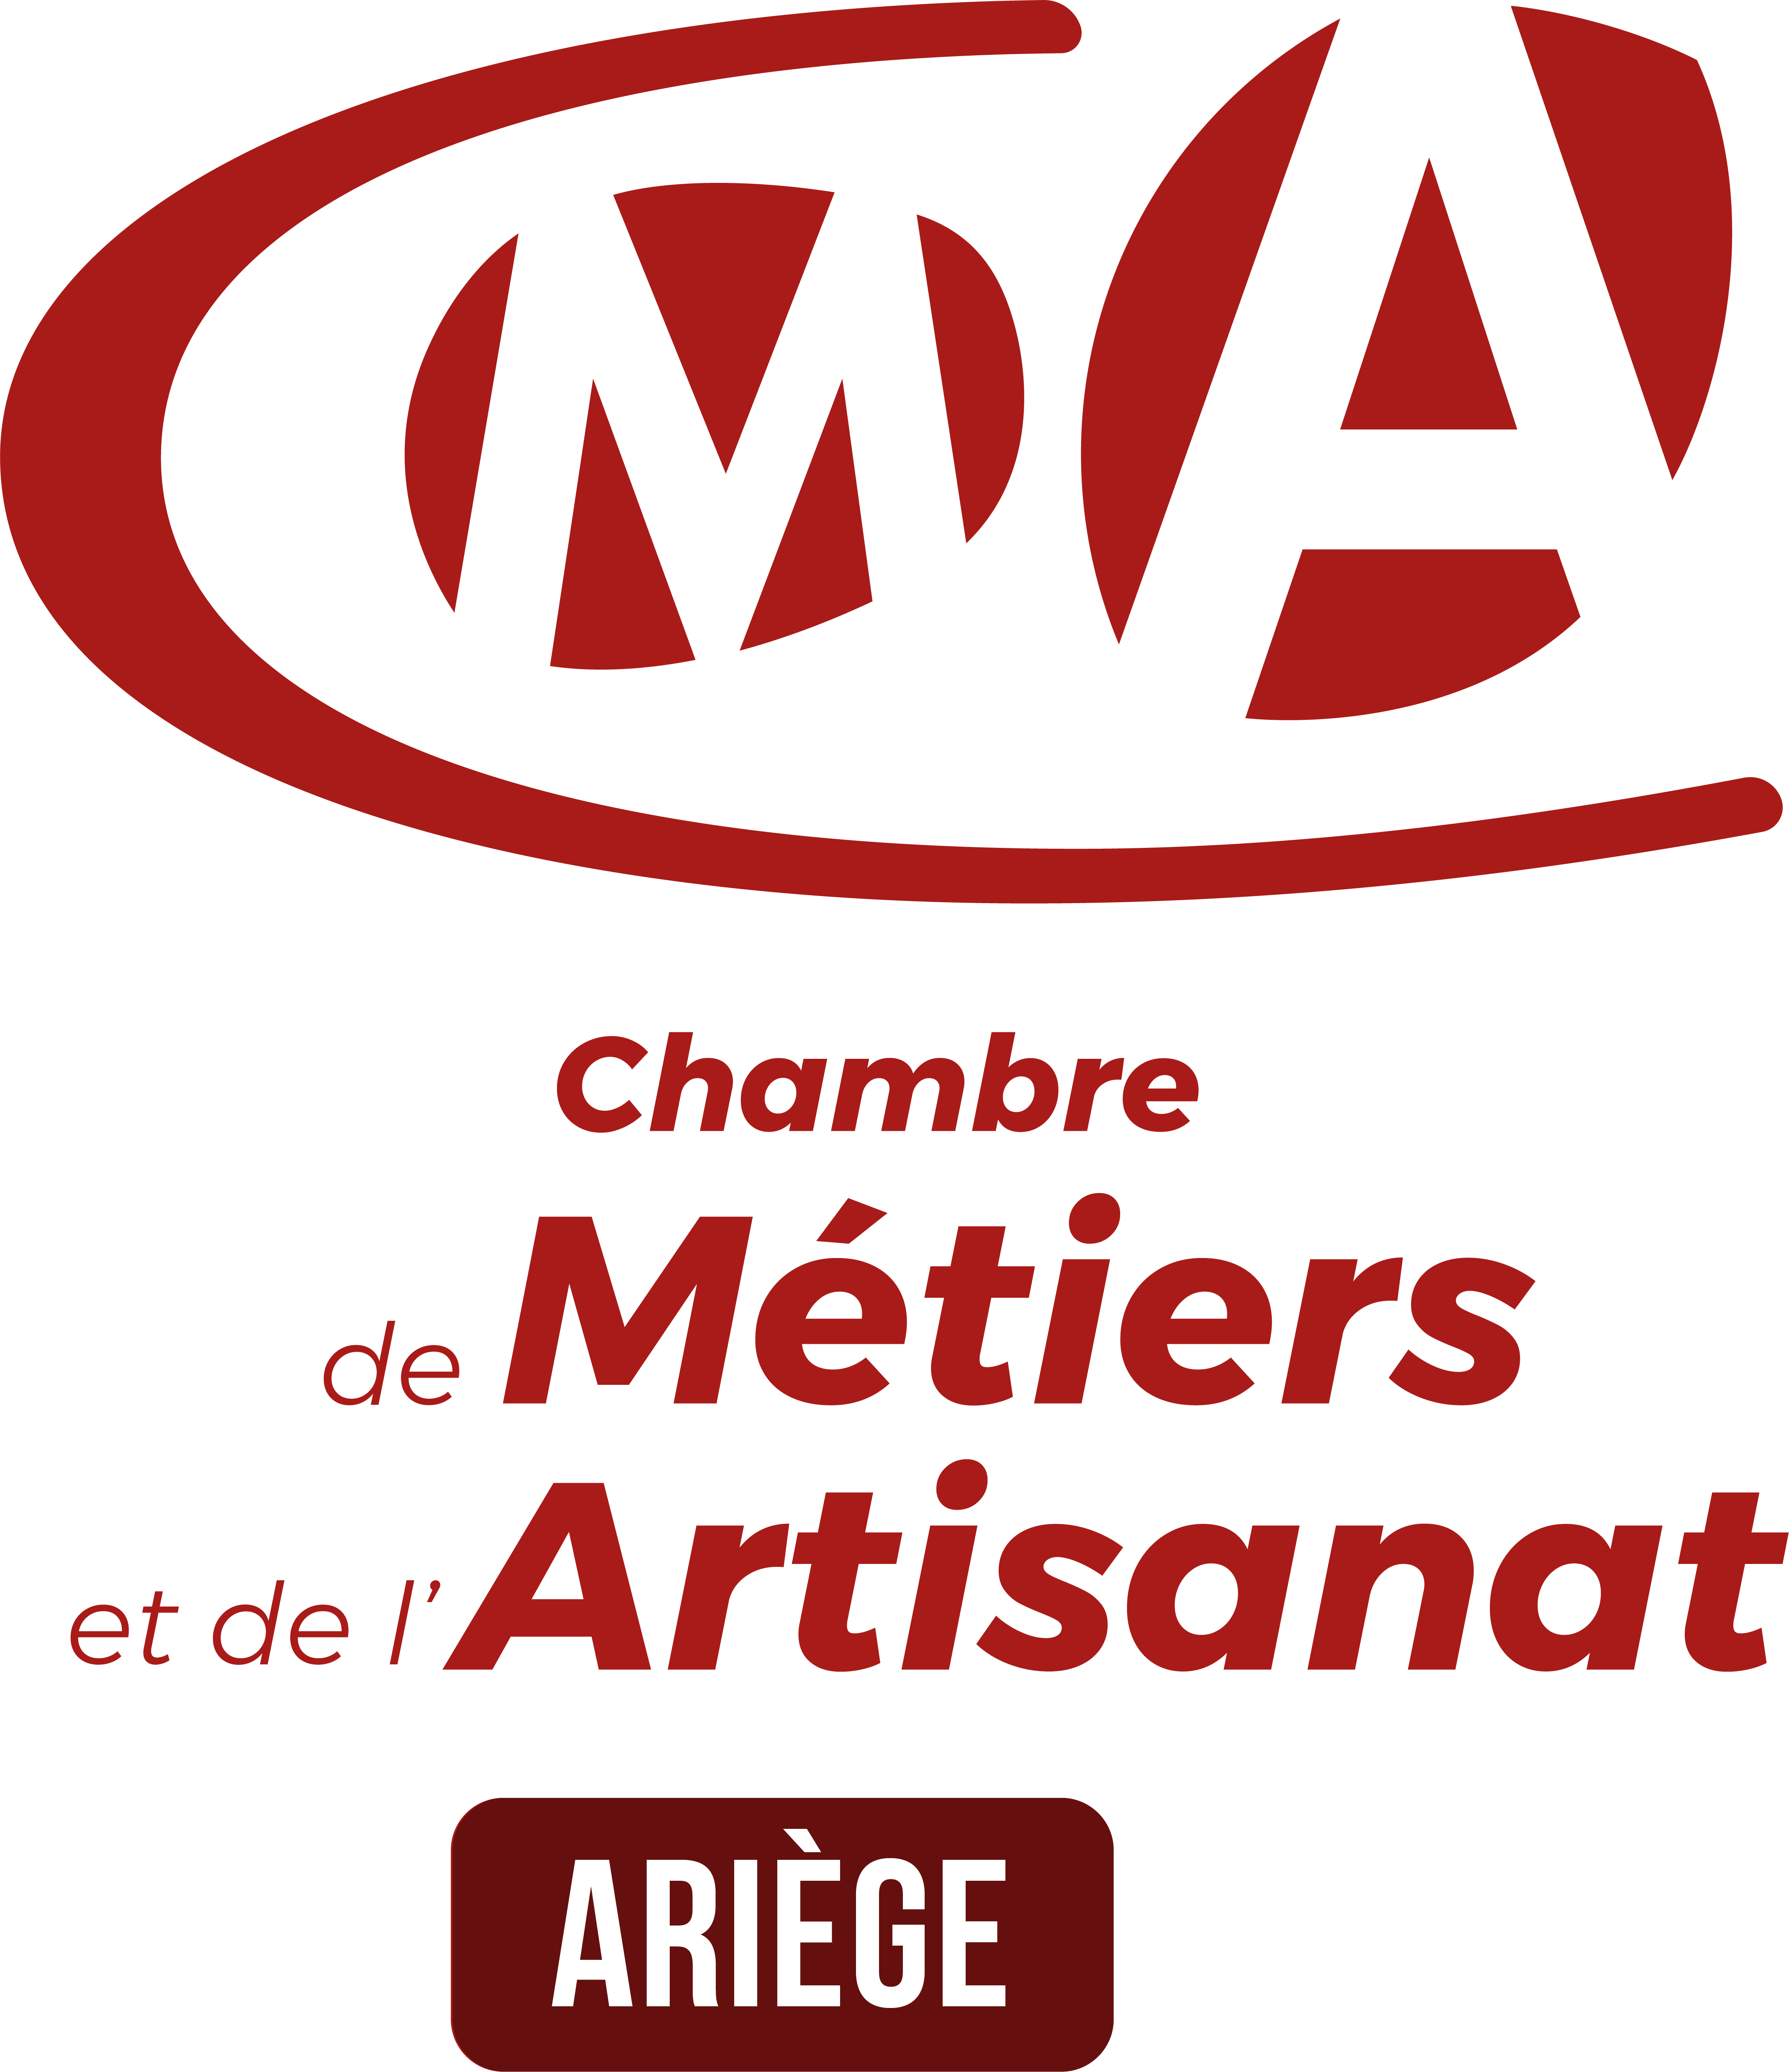 cma-logo-2018-ROUGE-local.png